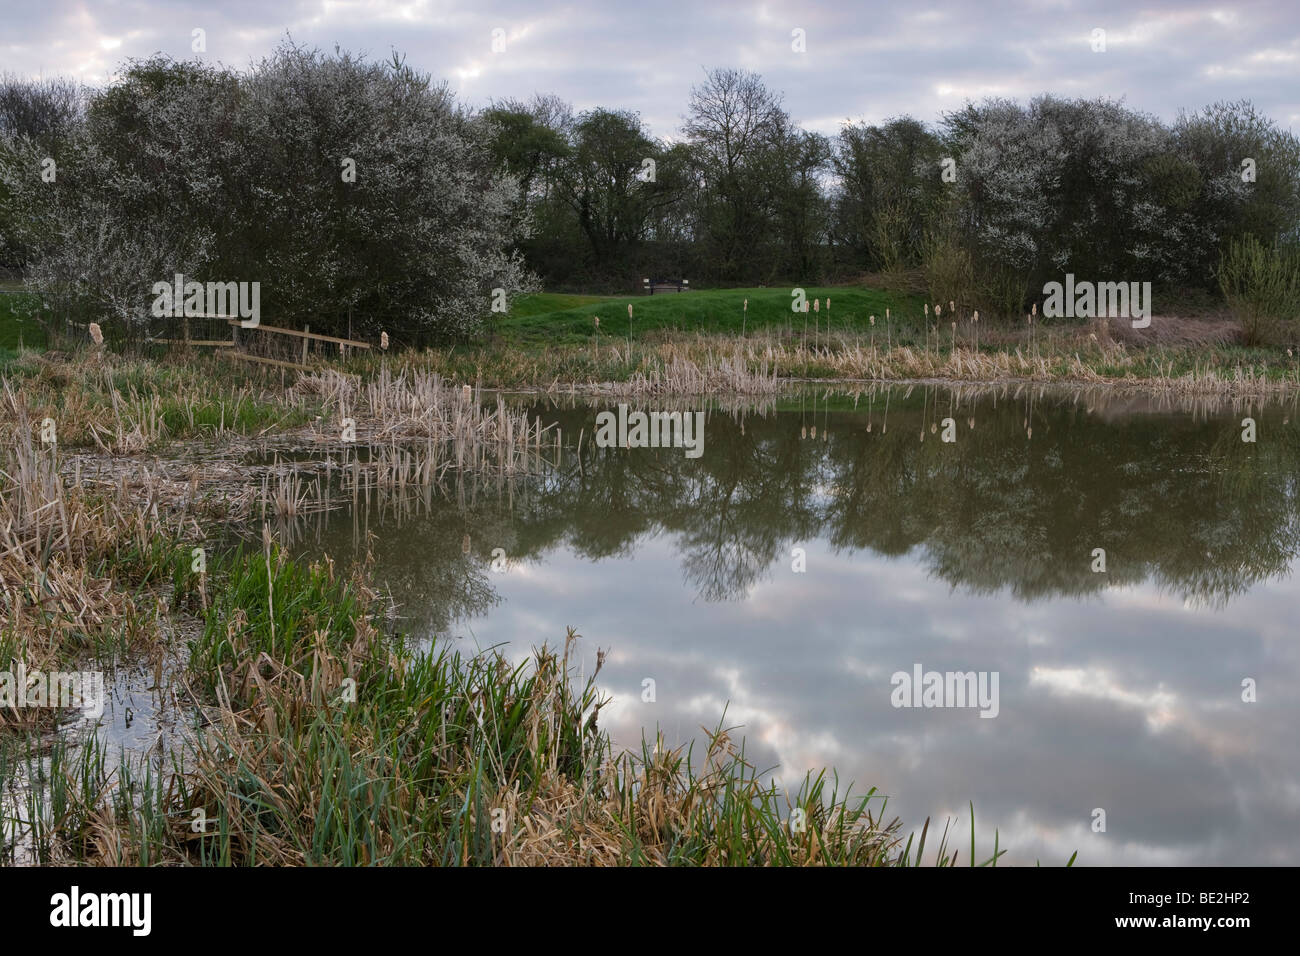 Pond Reflections, Foxton, Leicestershire, England, UK Stock Photo